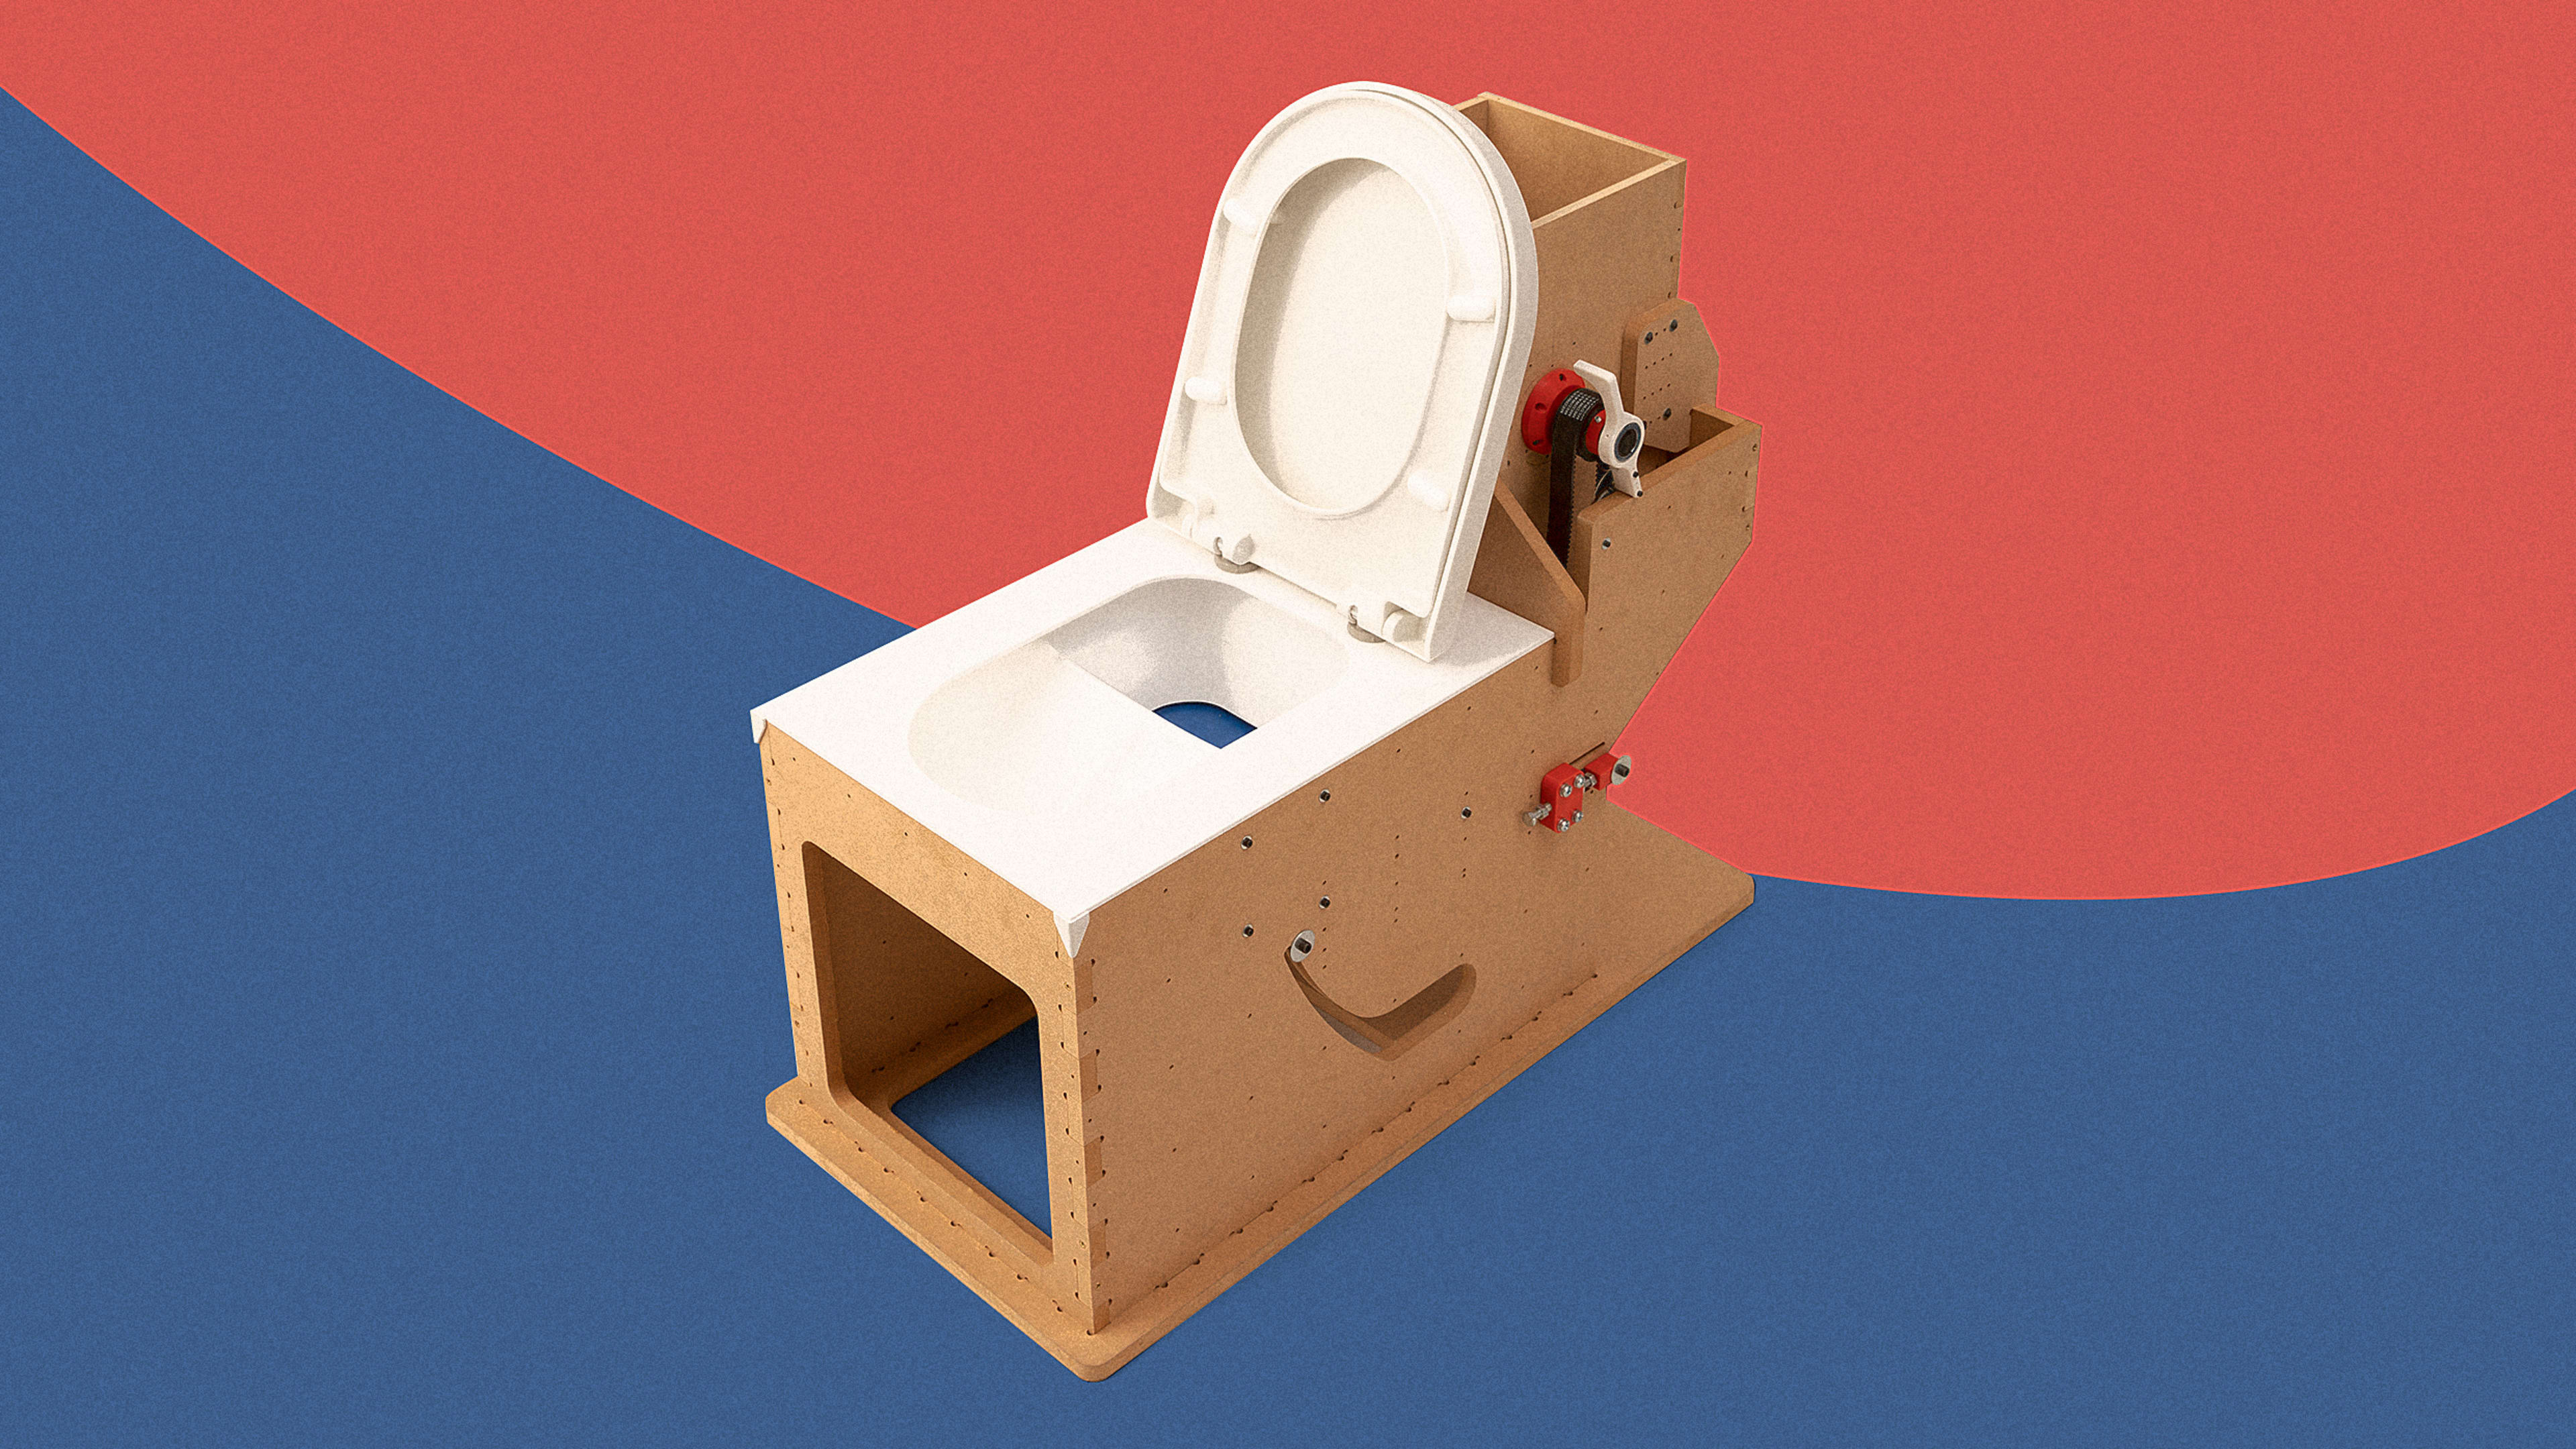 This off-grid toilet uses sand and a conveyor belt to ‘flush’ your business